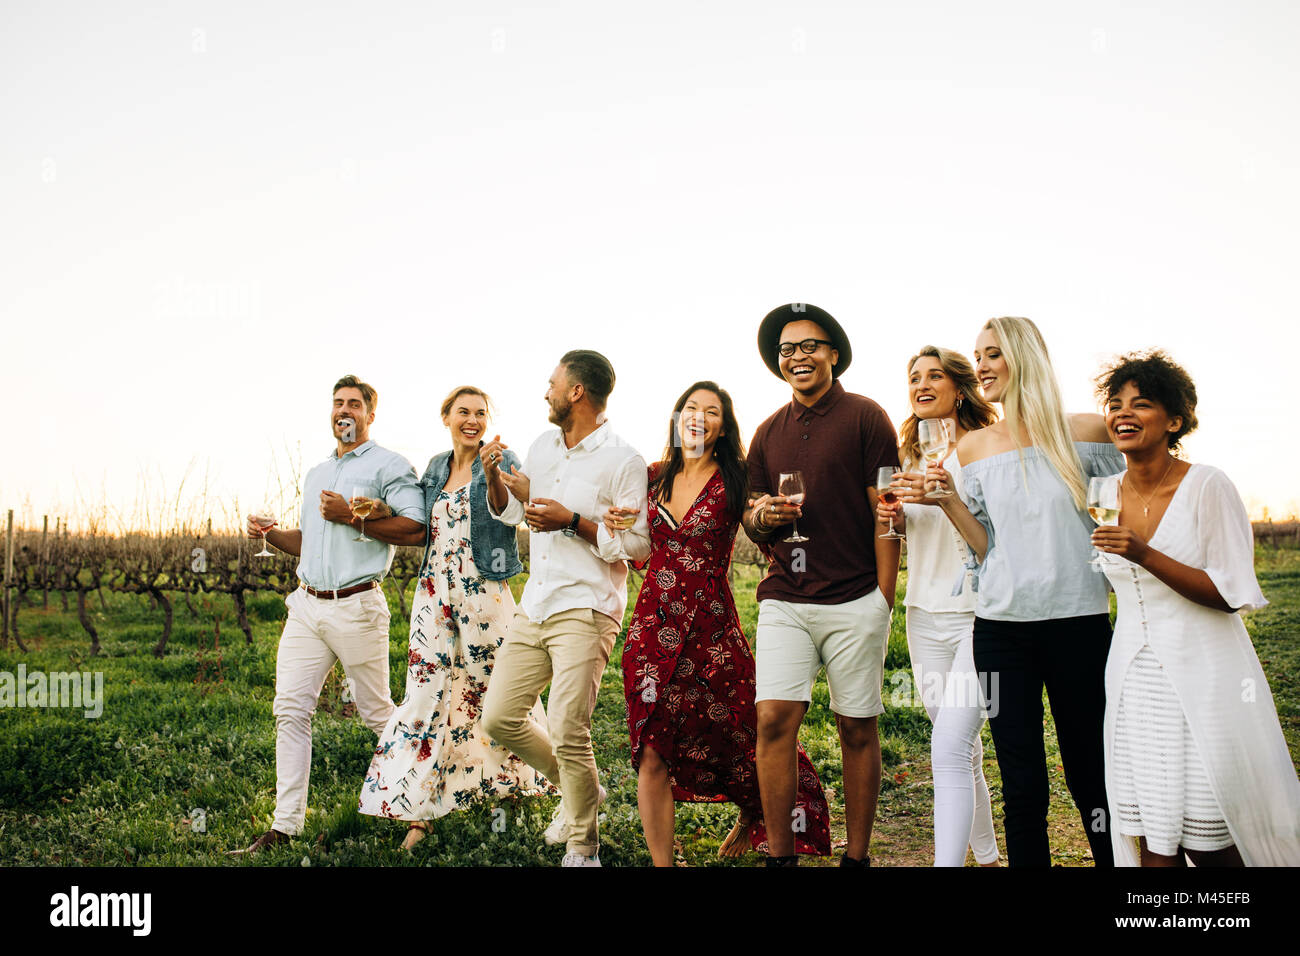 Group of friends enjoying a walk outside in countryside. Multi-ethnic millennials with drink partying outdoors in vineyard. Stock Photo